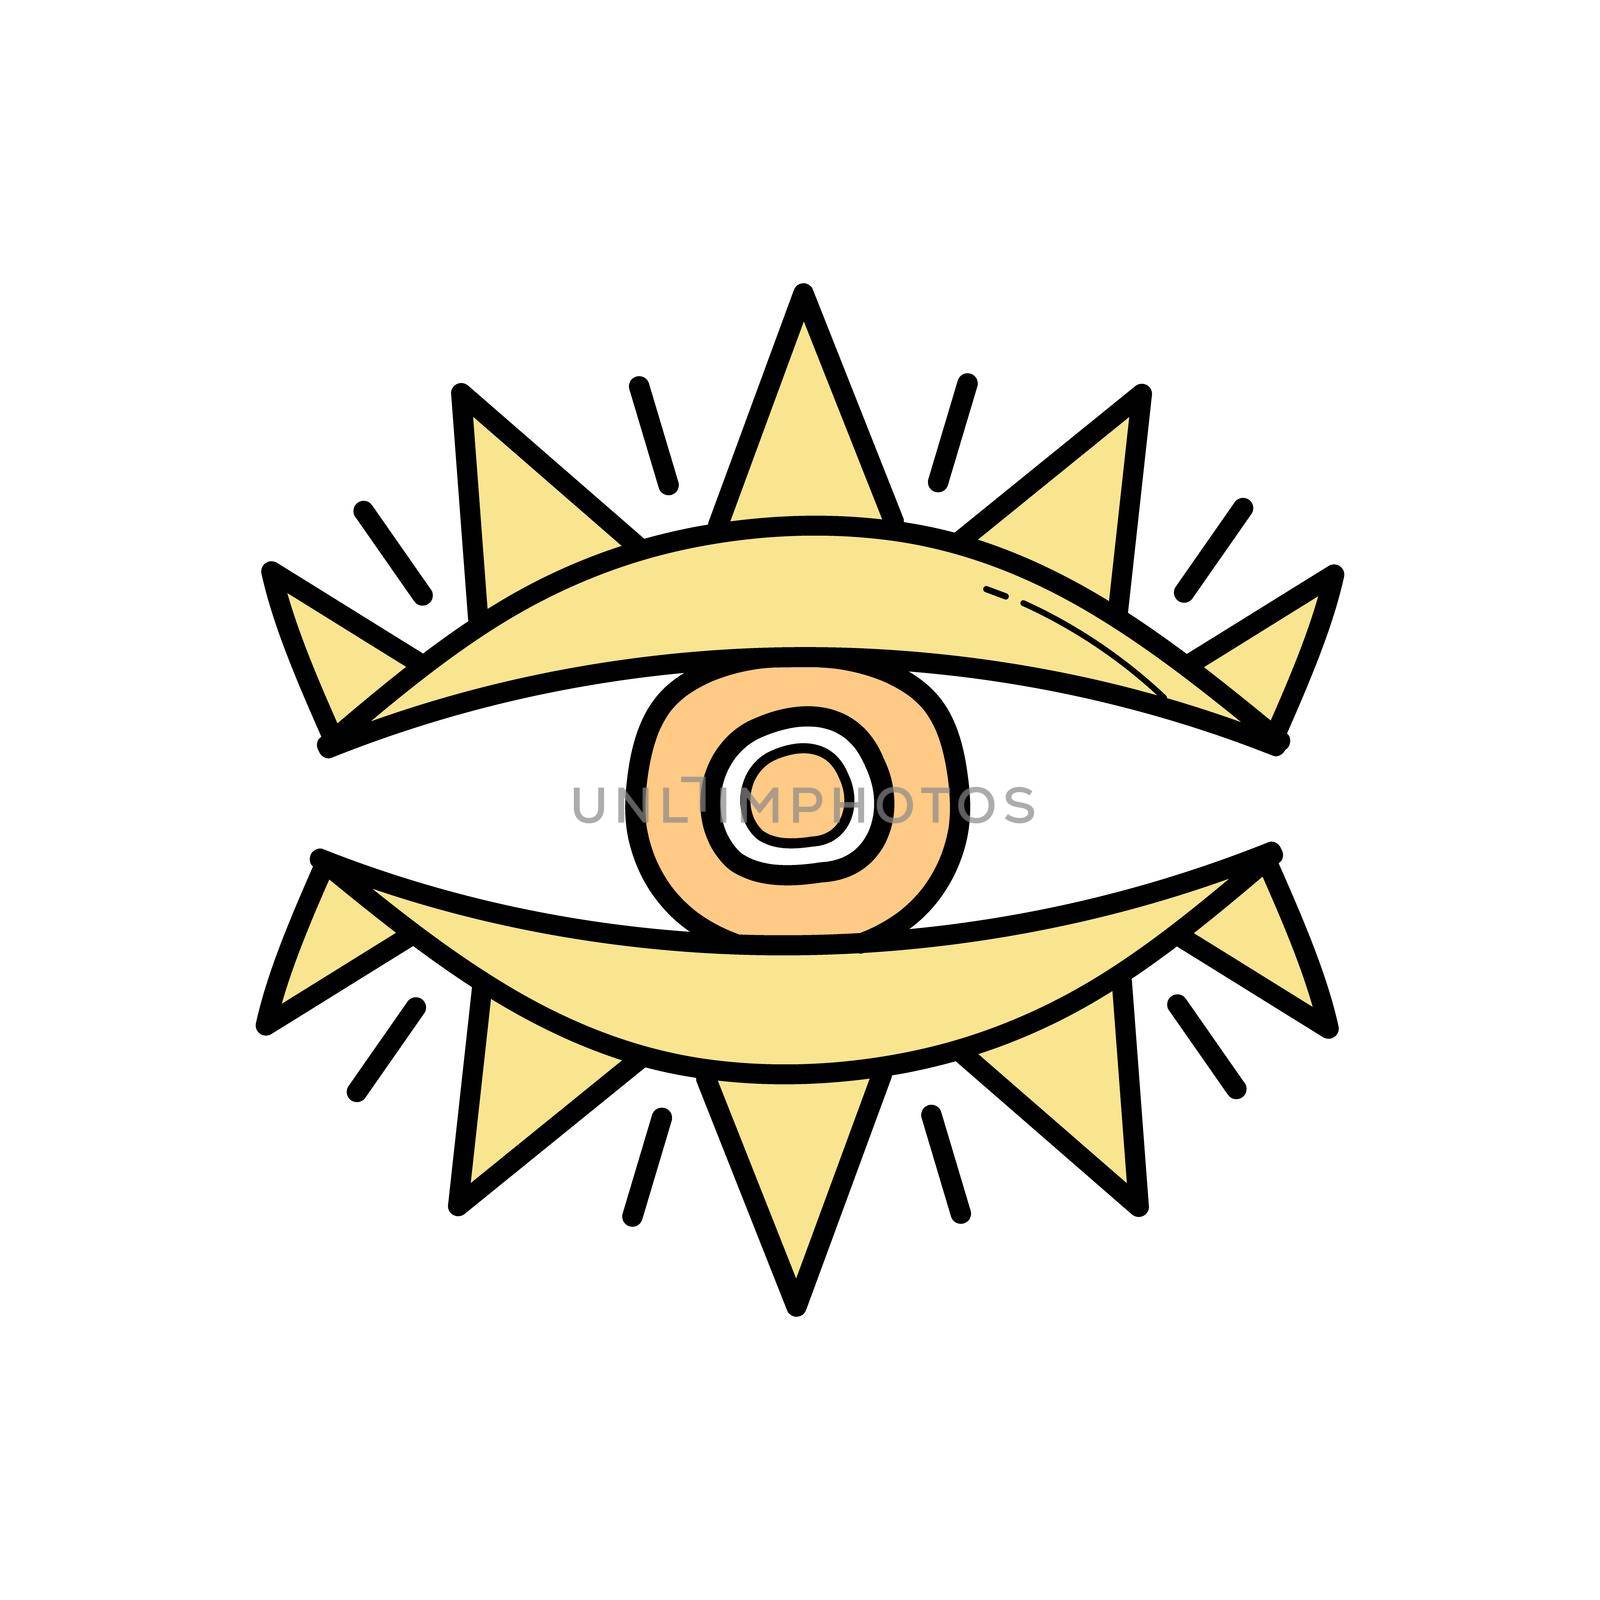 Eye mystic boho symbol. Abstract zen eye sign for design. Doodle simple icon in yellow color on white.